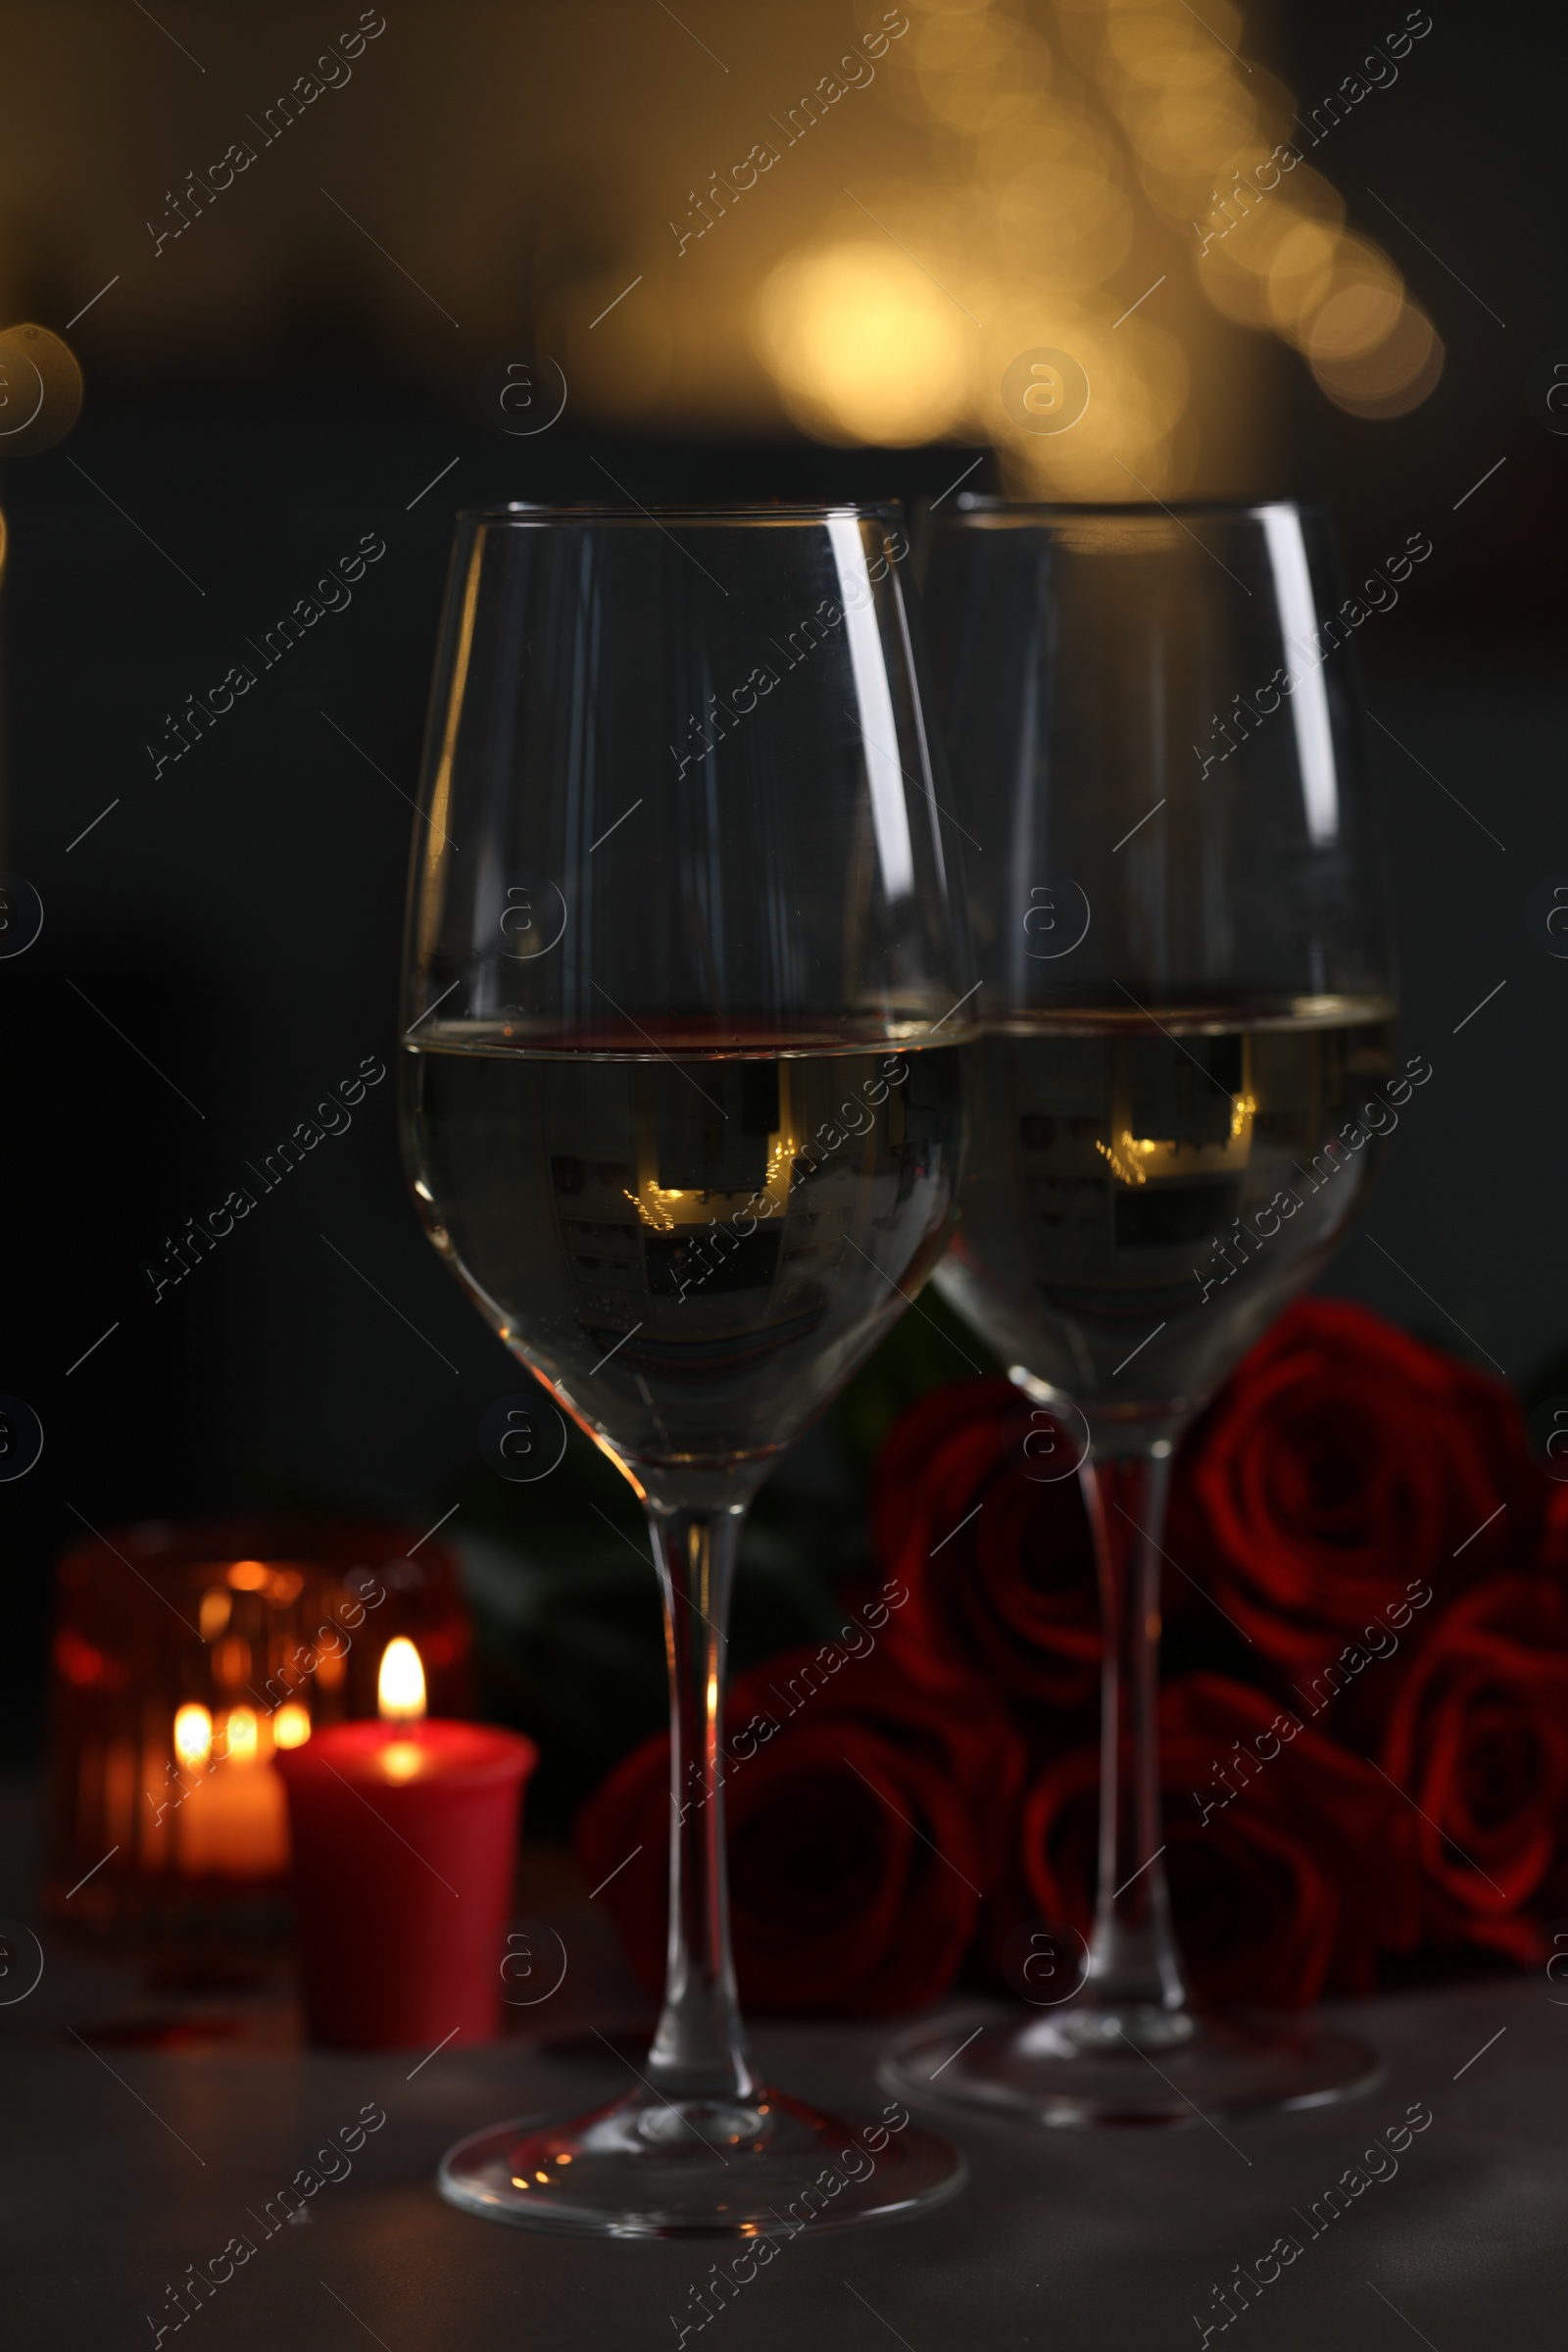 Photo of Glasses of white wine, burning candle and rose flowers on grey table against blurred lights. Romantic atmosphere